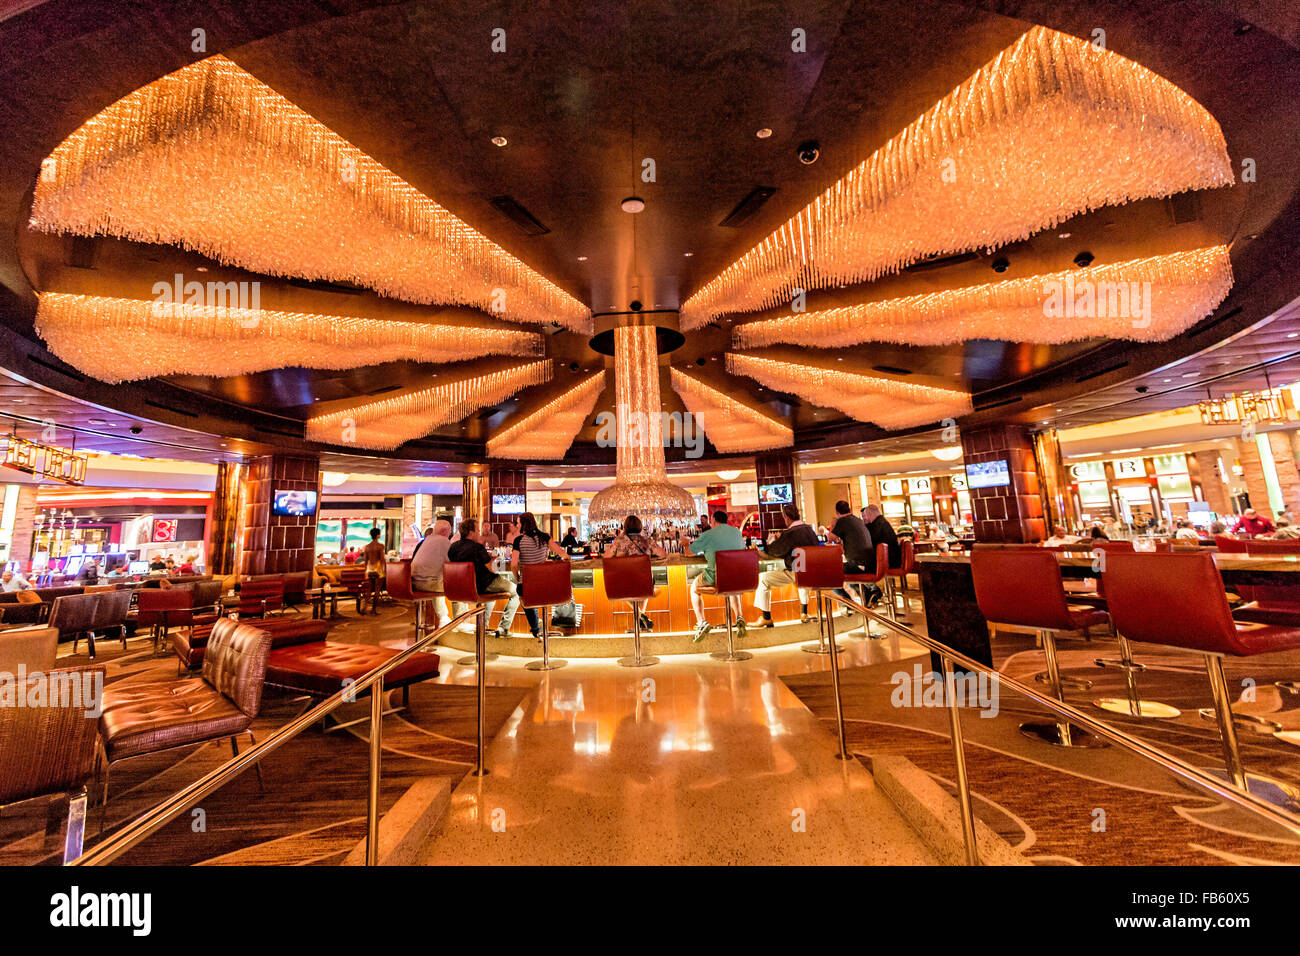 Vil have Bangladesh Dårligt humør Lucky Bar with its 1.6 million crystals in the chandelier at Red Rock Casino  Resort & Spa, Las Vegas, Nevada, USA Stock Photo - Alamy